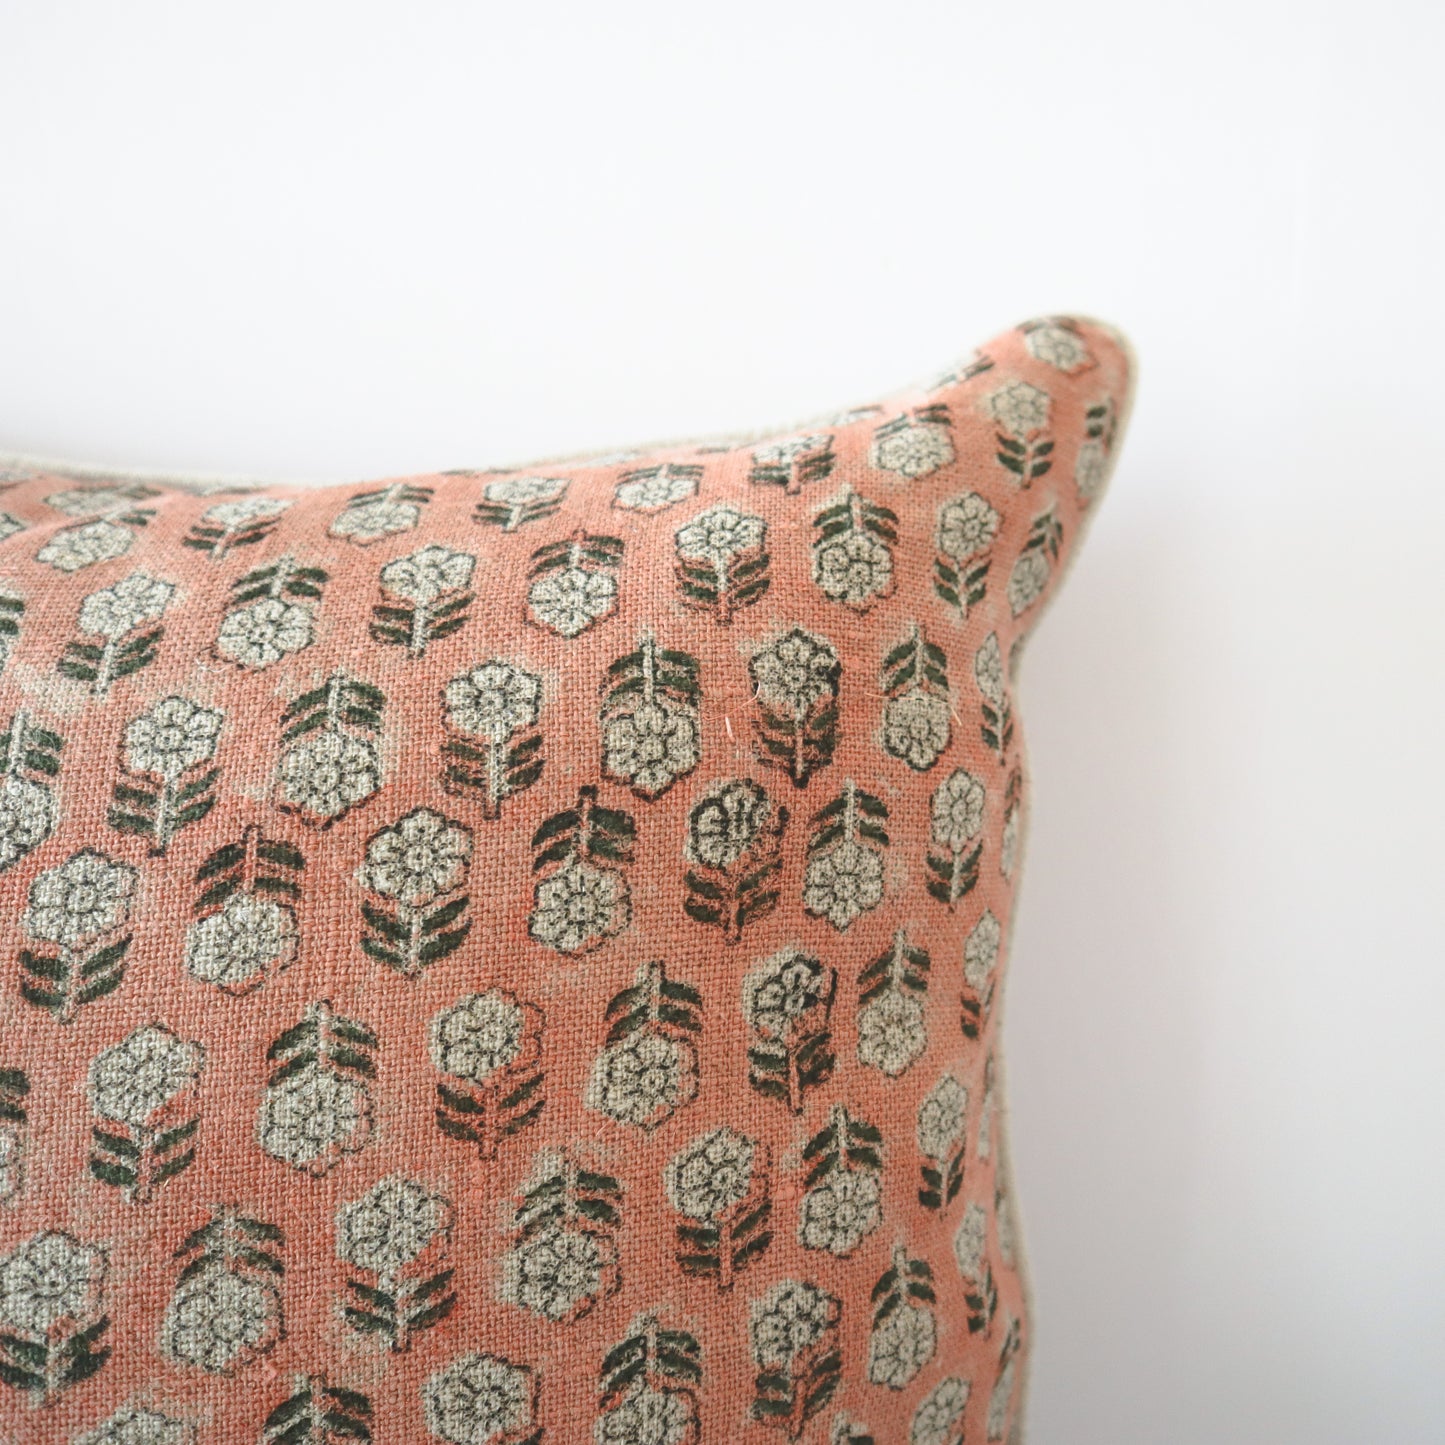 Tulsi Pillow in Coral